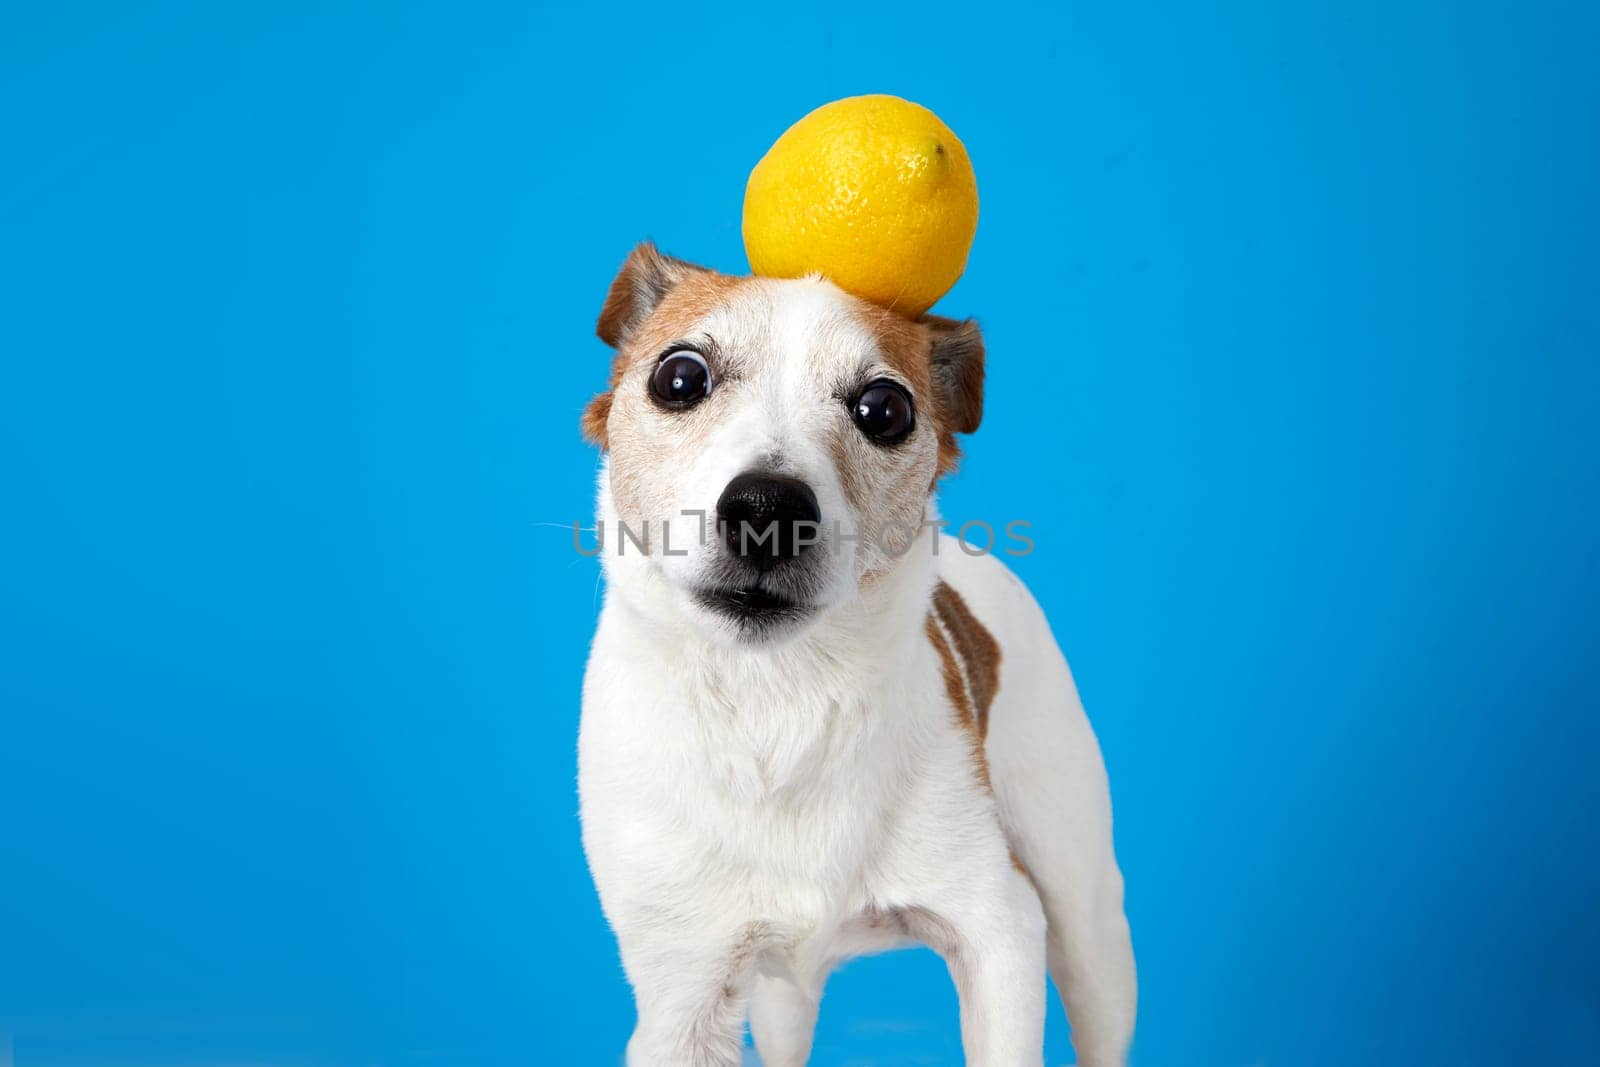 Crazy little dog with a lemon on his head by Demkat